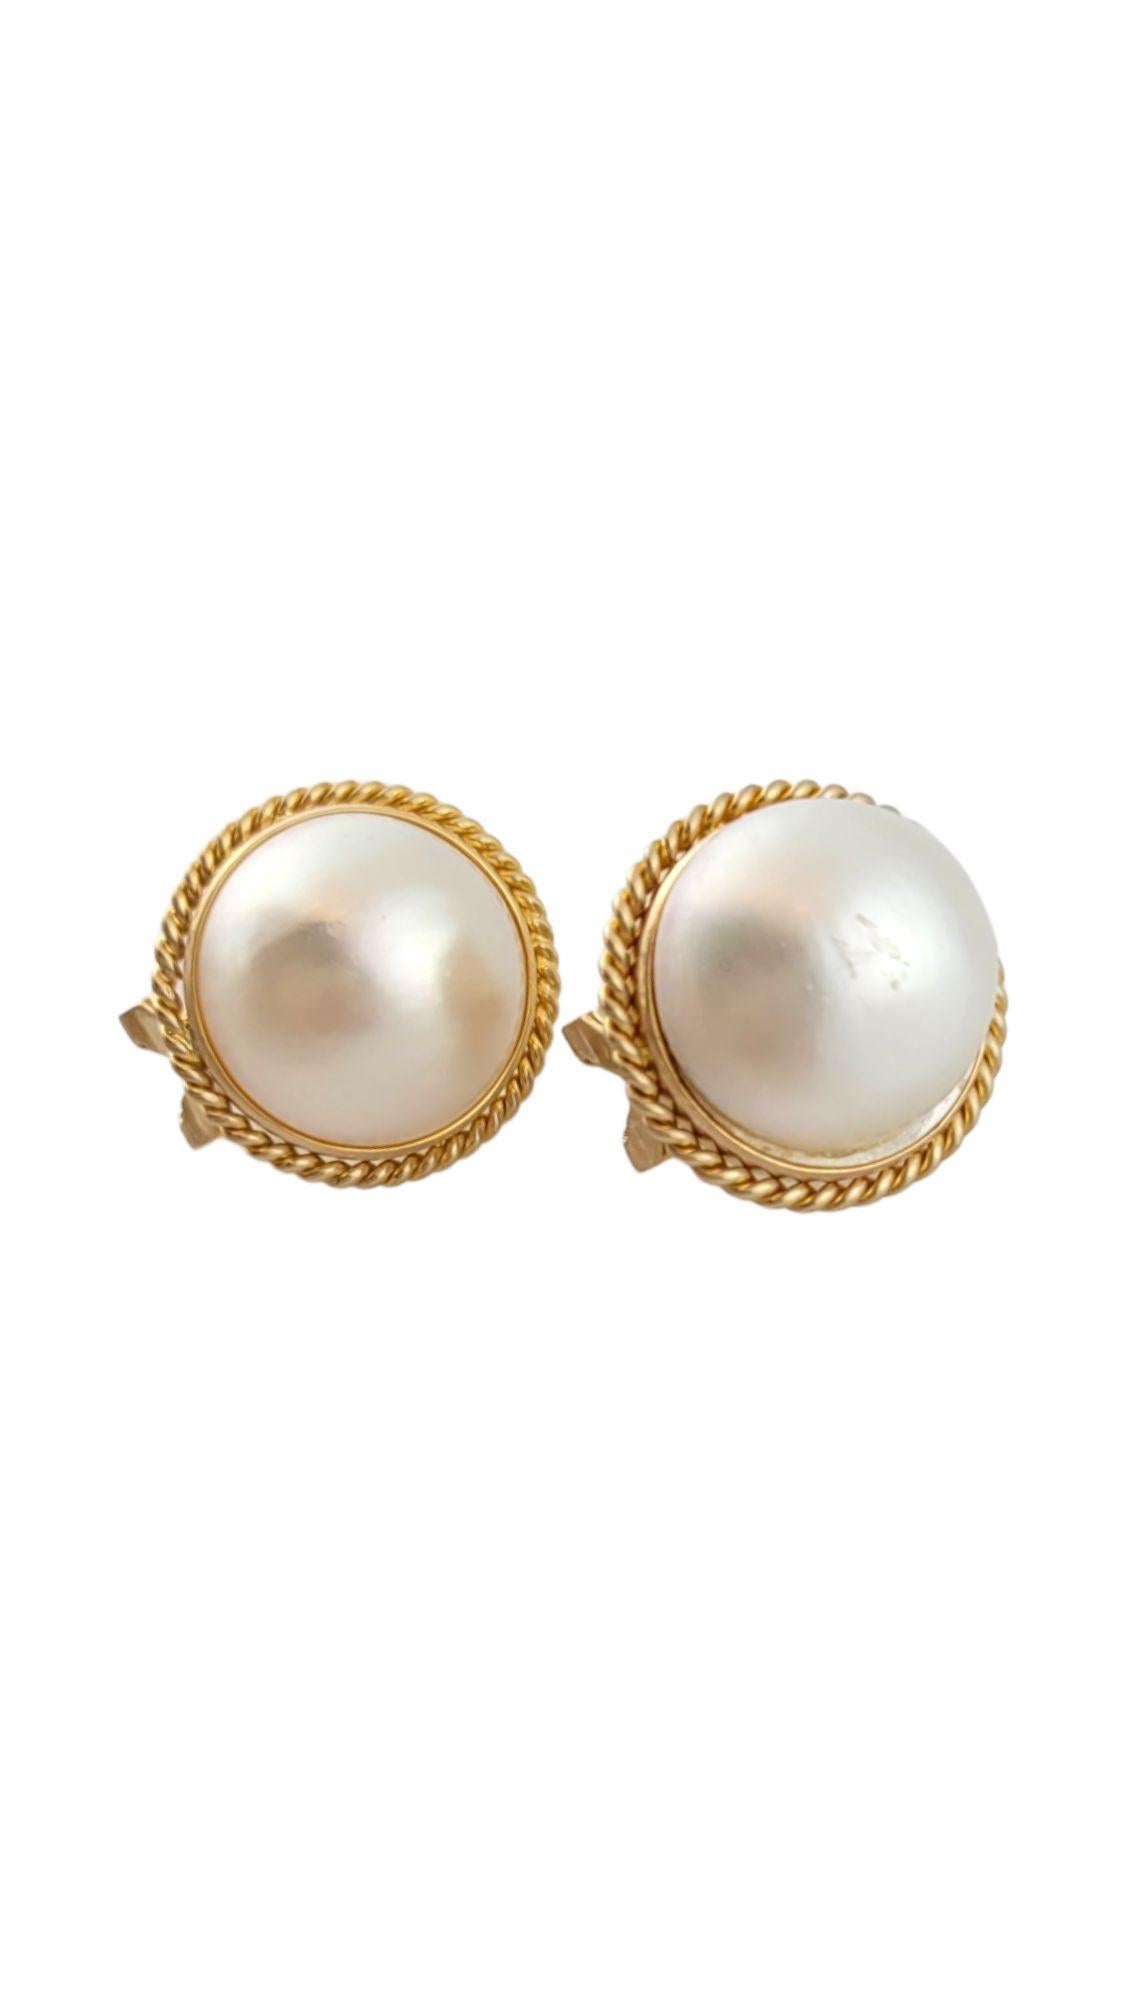 This gorgeous set of 14K gold earrings features a beautiful 16mm Mabe pearl on each earring!

Size: 20mm X 20mm X 11.5mm

Weight: 12.72 g/ 8.2 dwt

Hallmark: 585 KS

Very good condition, professionally polished.

Will come packaged in a gift box or